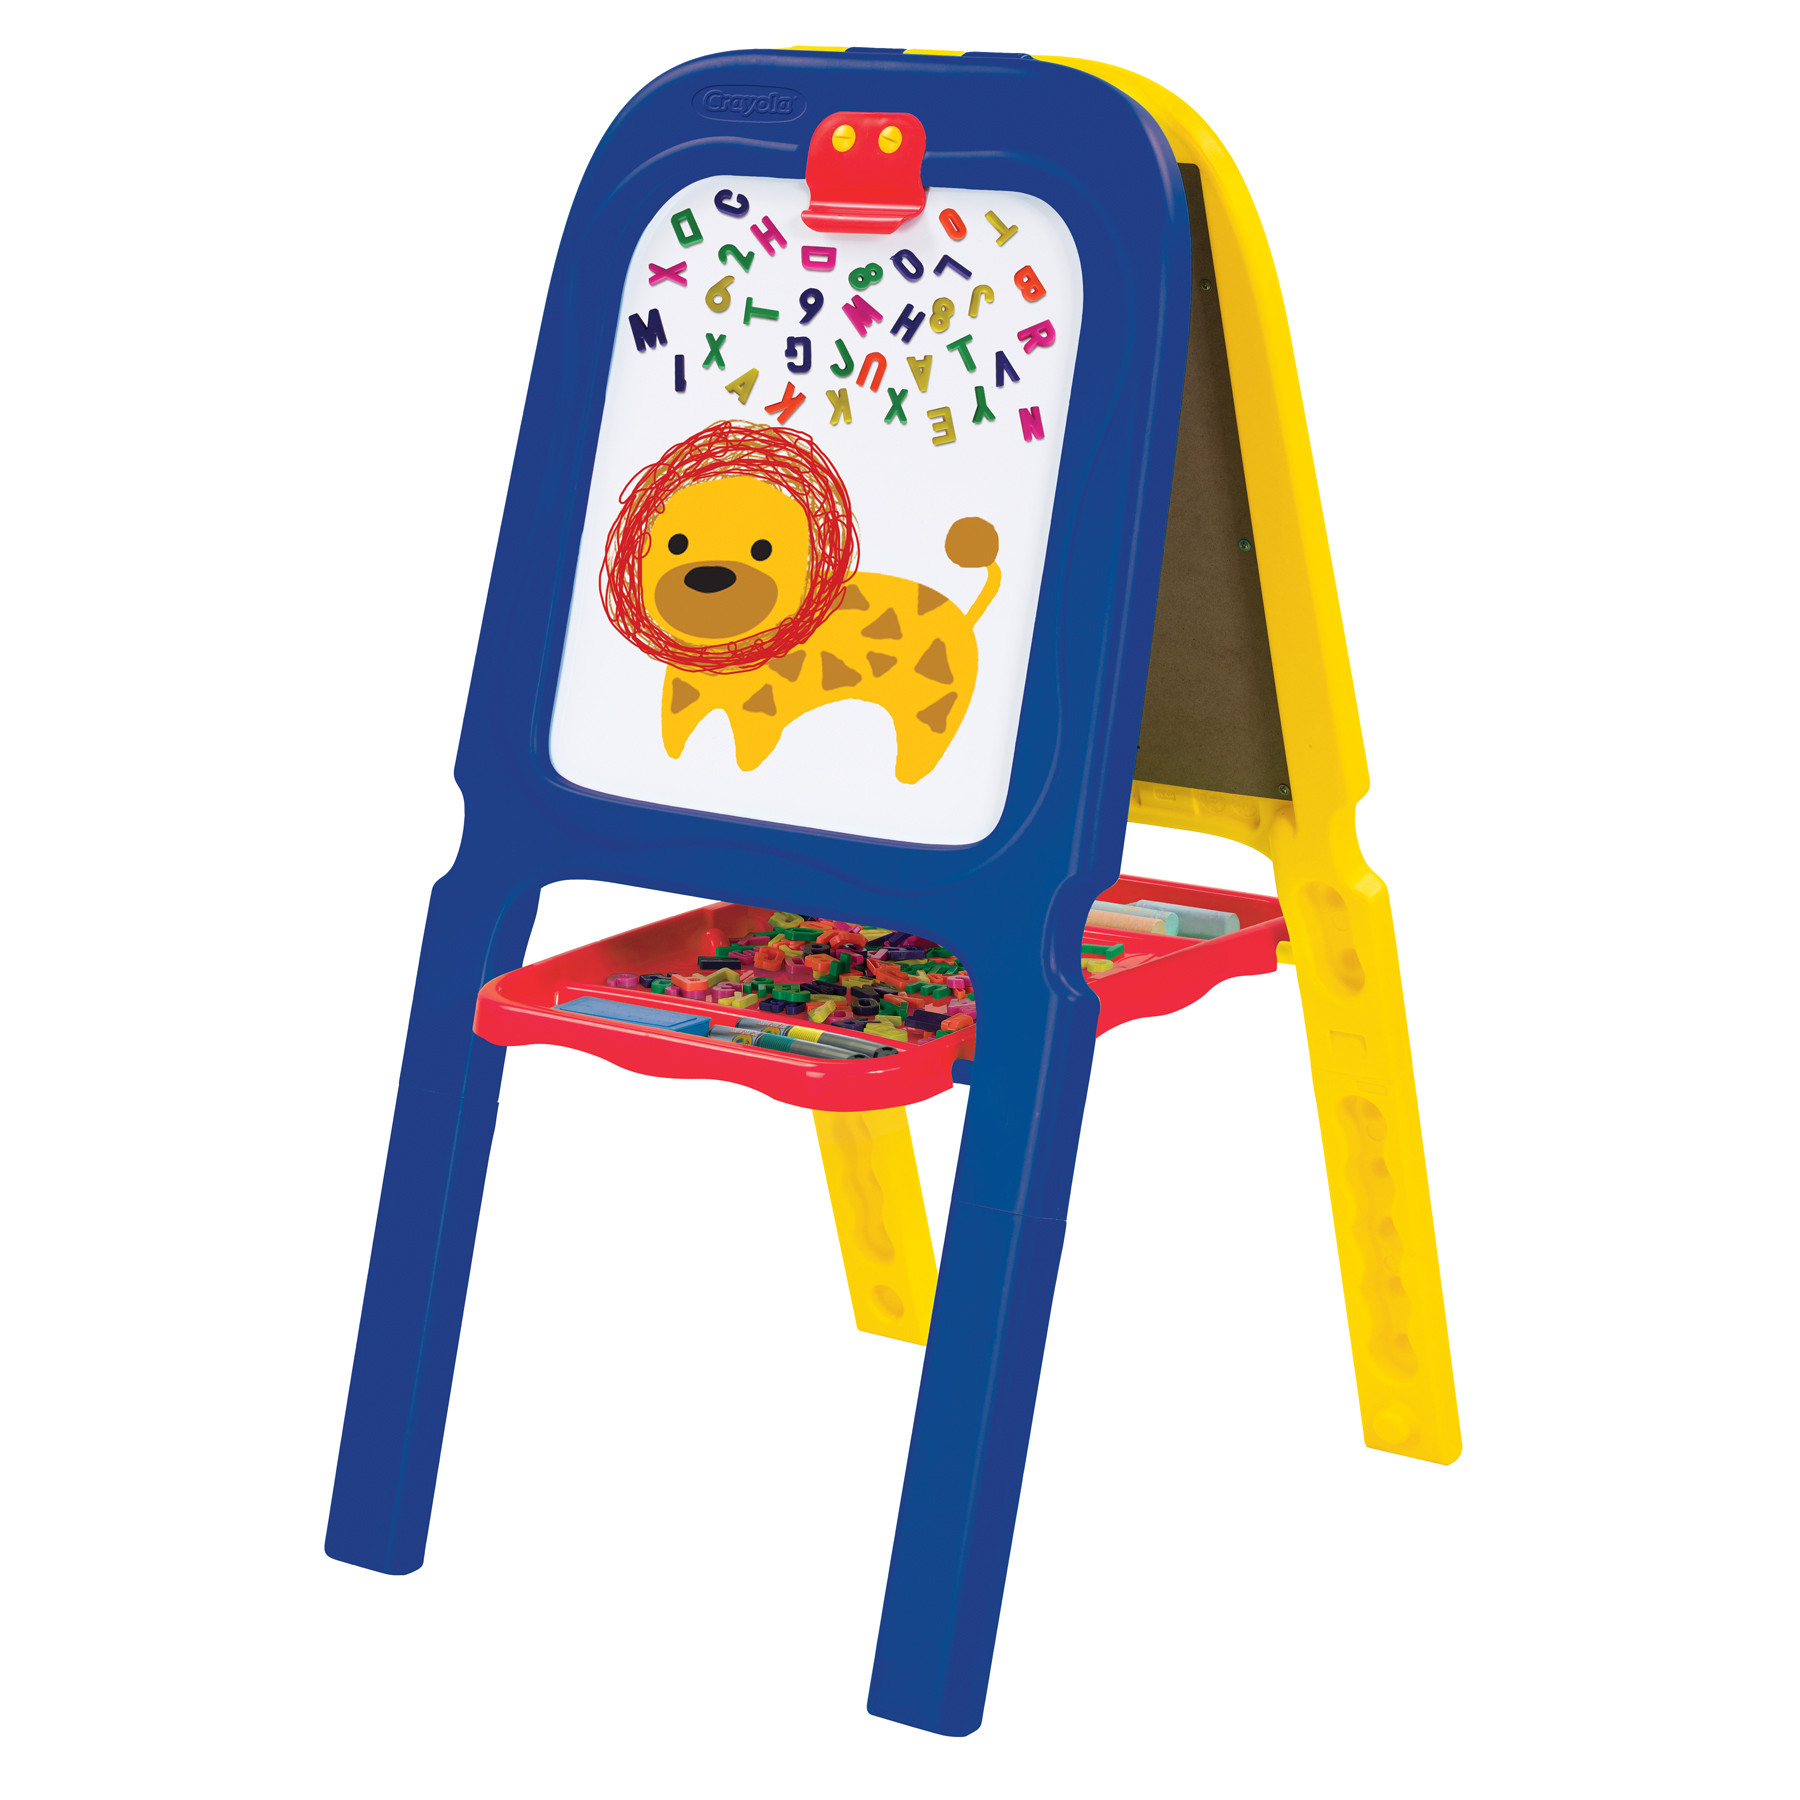 Kids Craft Easel
 Crayola 3 in 1 Double Easel